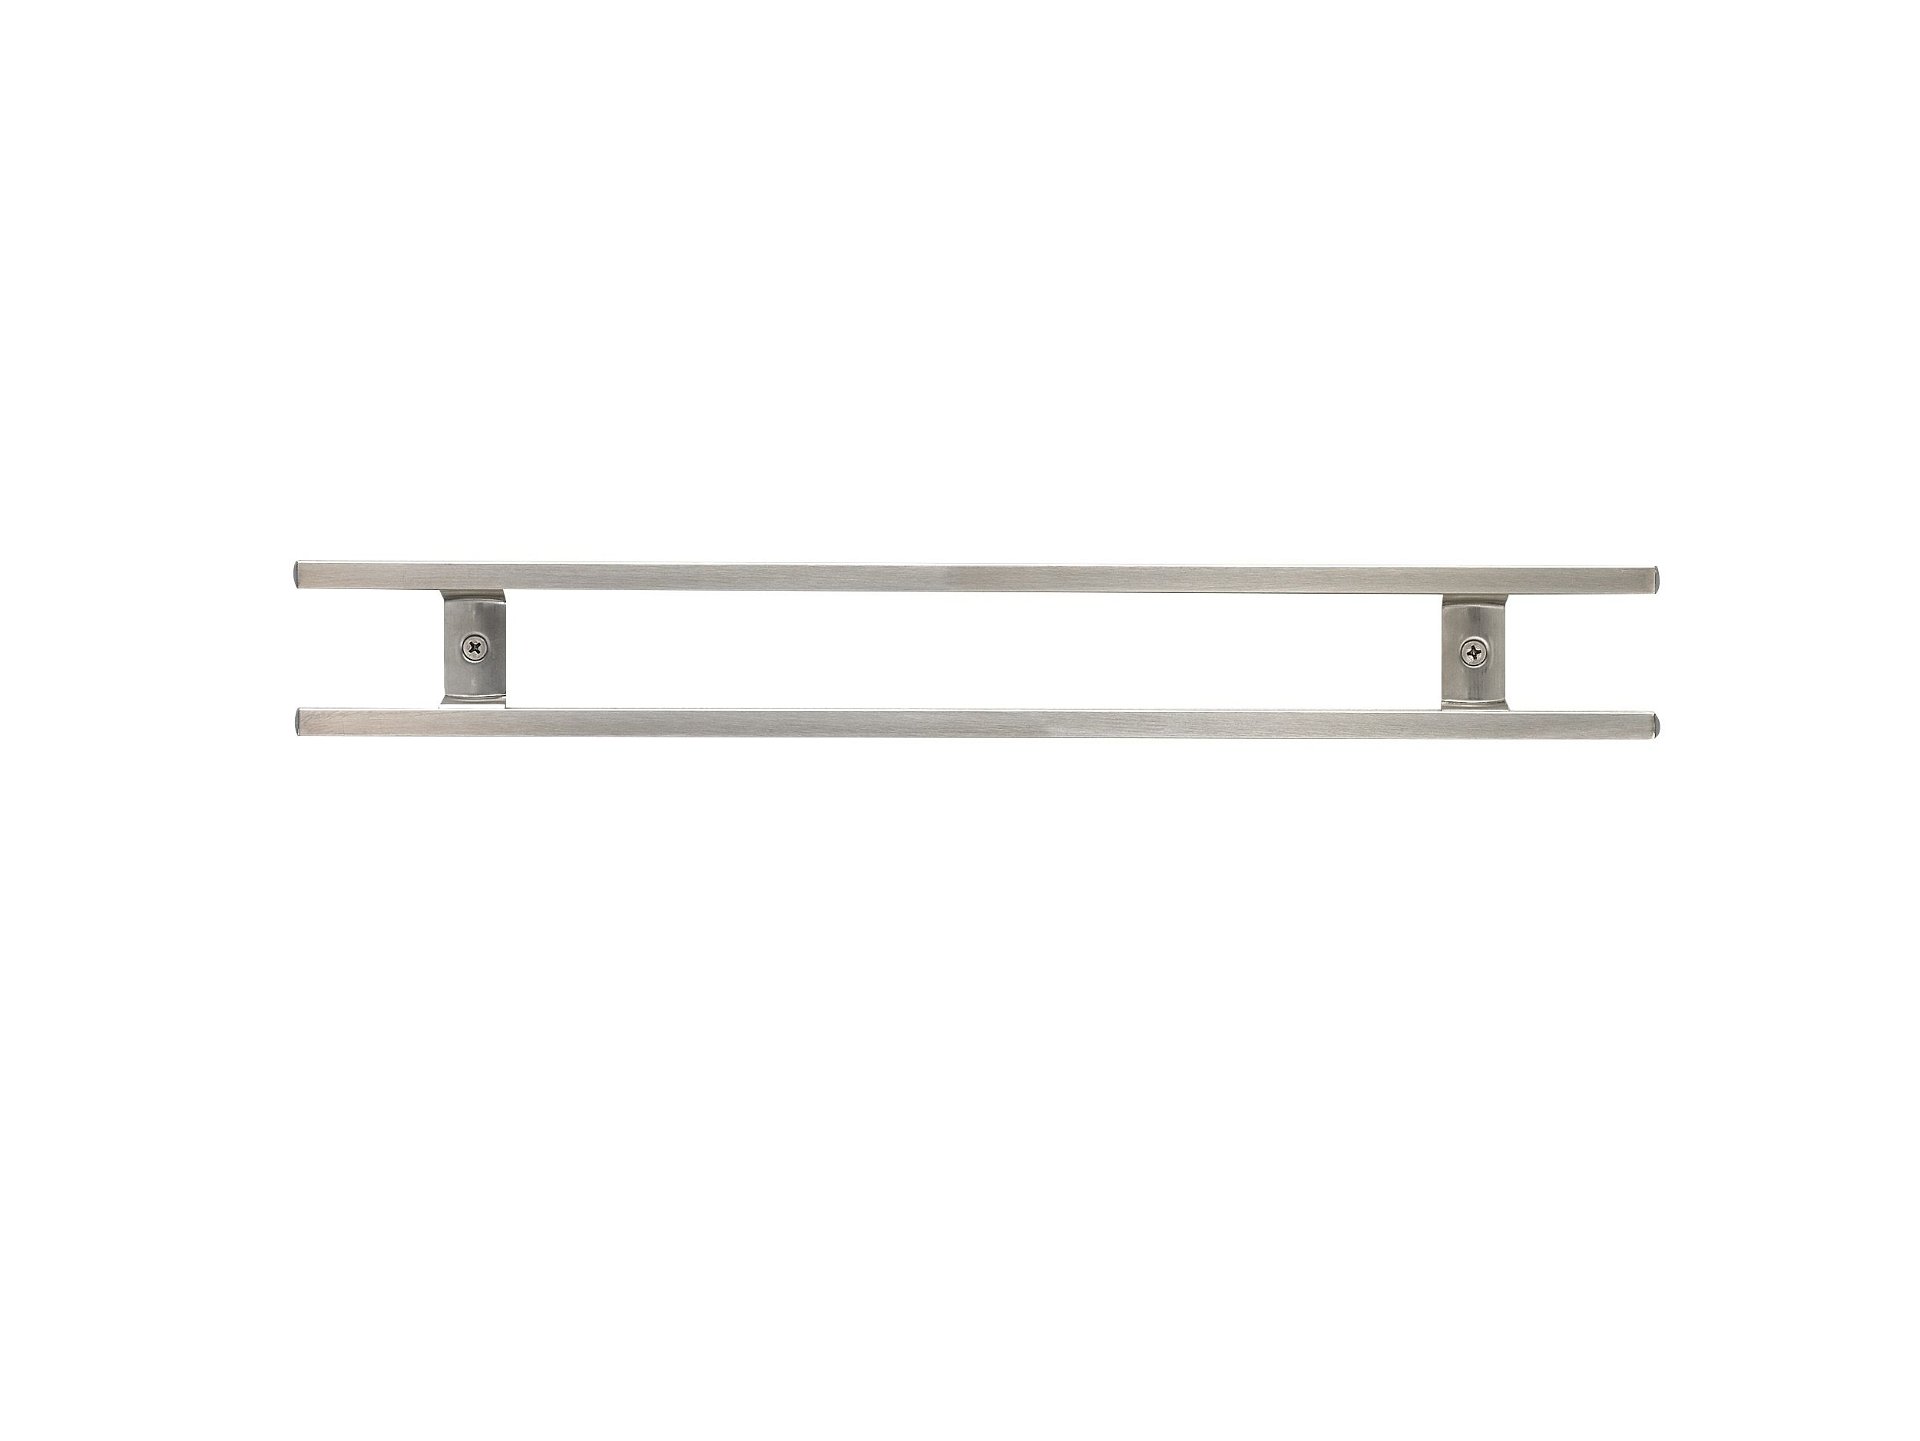 Mercer Culinary 24 Magnetic Knife Bar | Stainless Steel - M30752